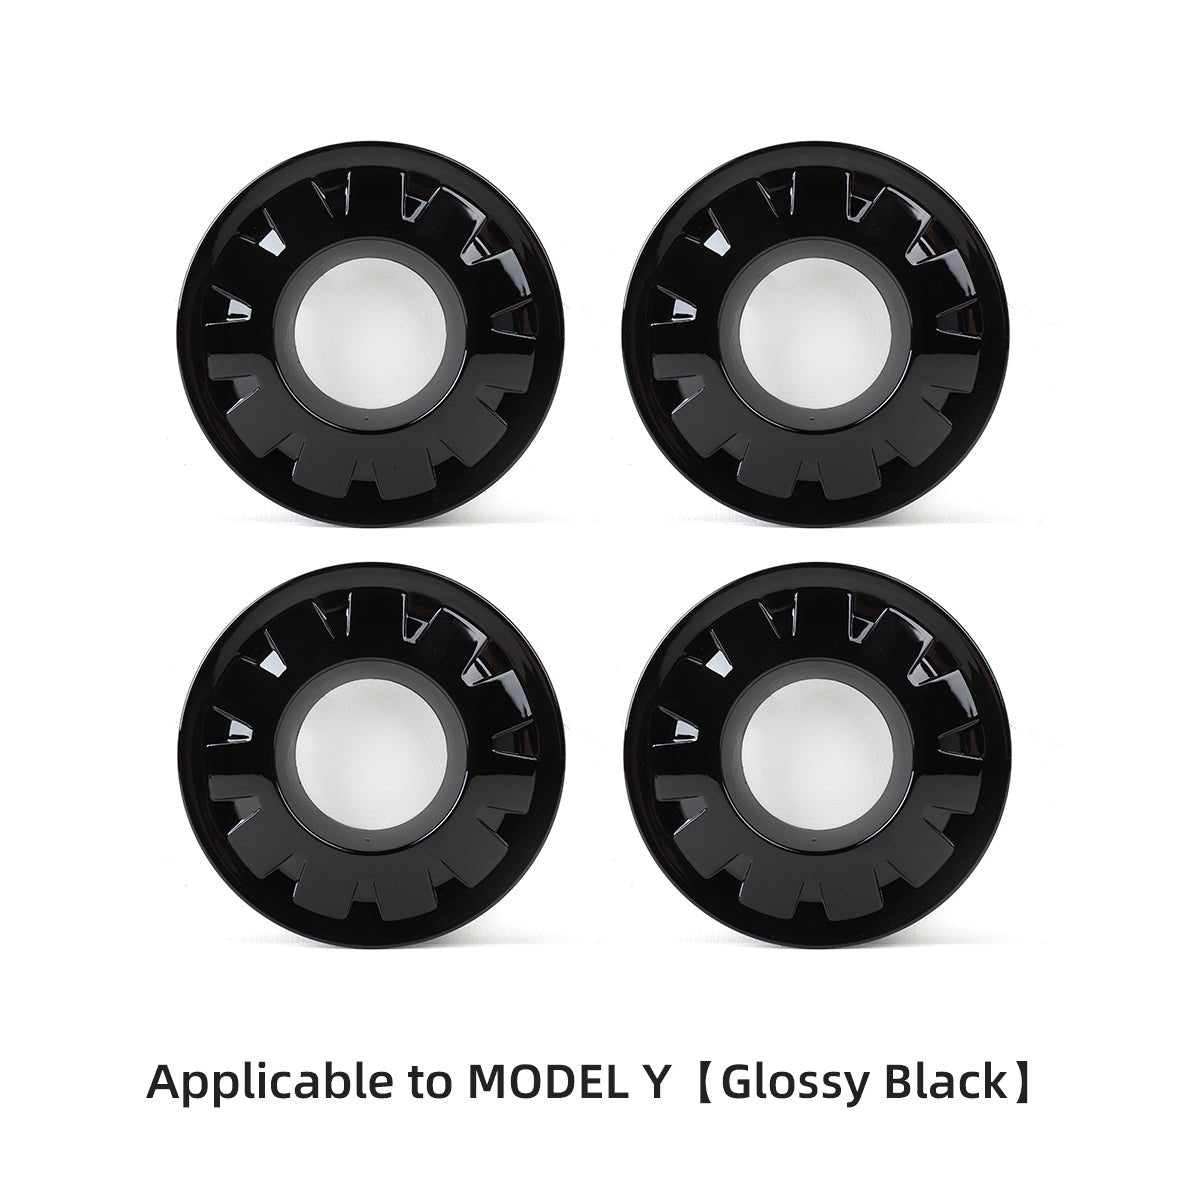 20-Inch Wheel Hub Cover for Tesla Model Y 2020-2024 - Tesery Official Store